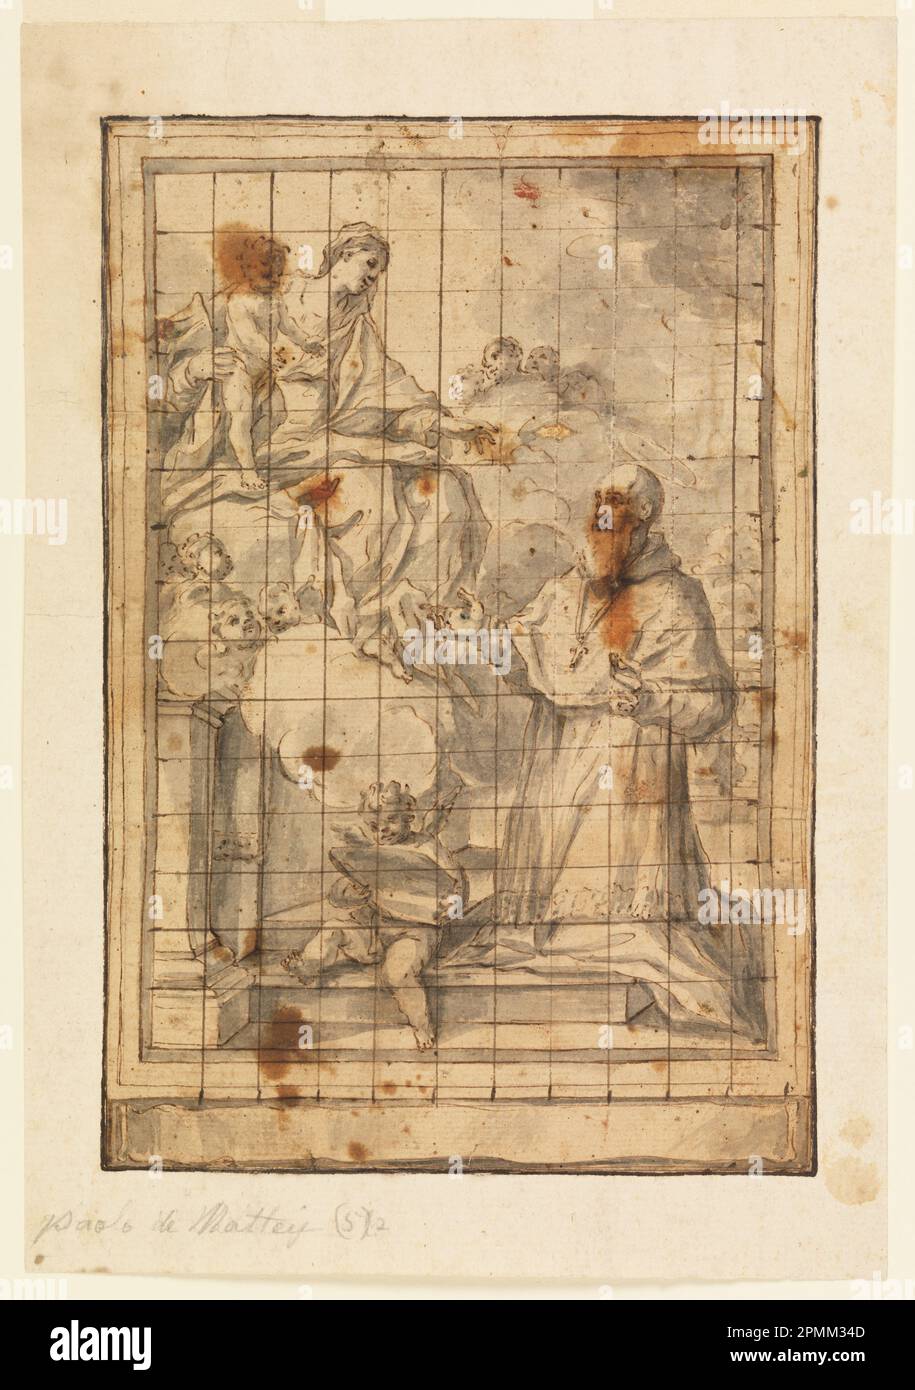 Drawing, Virgin and child in glory; Paolo de Mattheis (Italian, 1662 - 1728); Italy; pen and brown ink, gray wash, squared in brown ink, laid down; 25.5 x 17 cm (10 1/16 x 6 11/16 in.) Mount: 30.5 x 21 cm Stock Photo